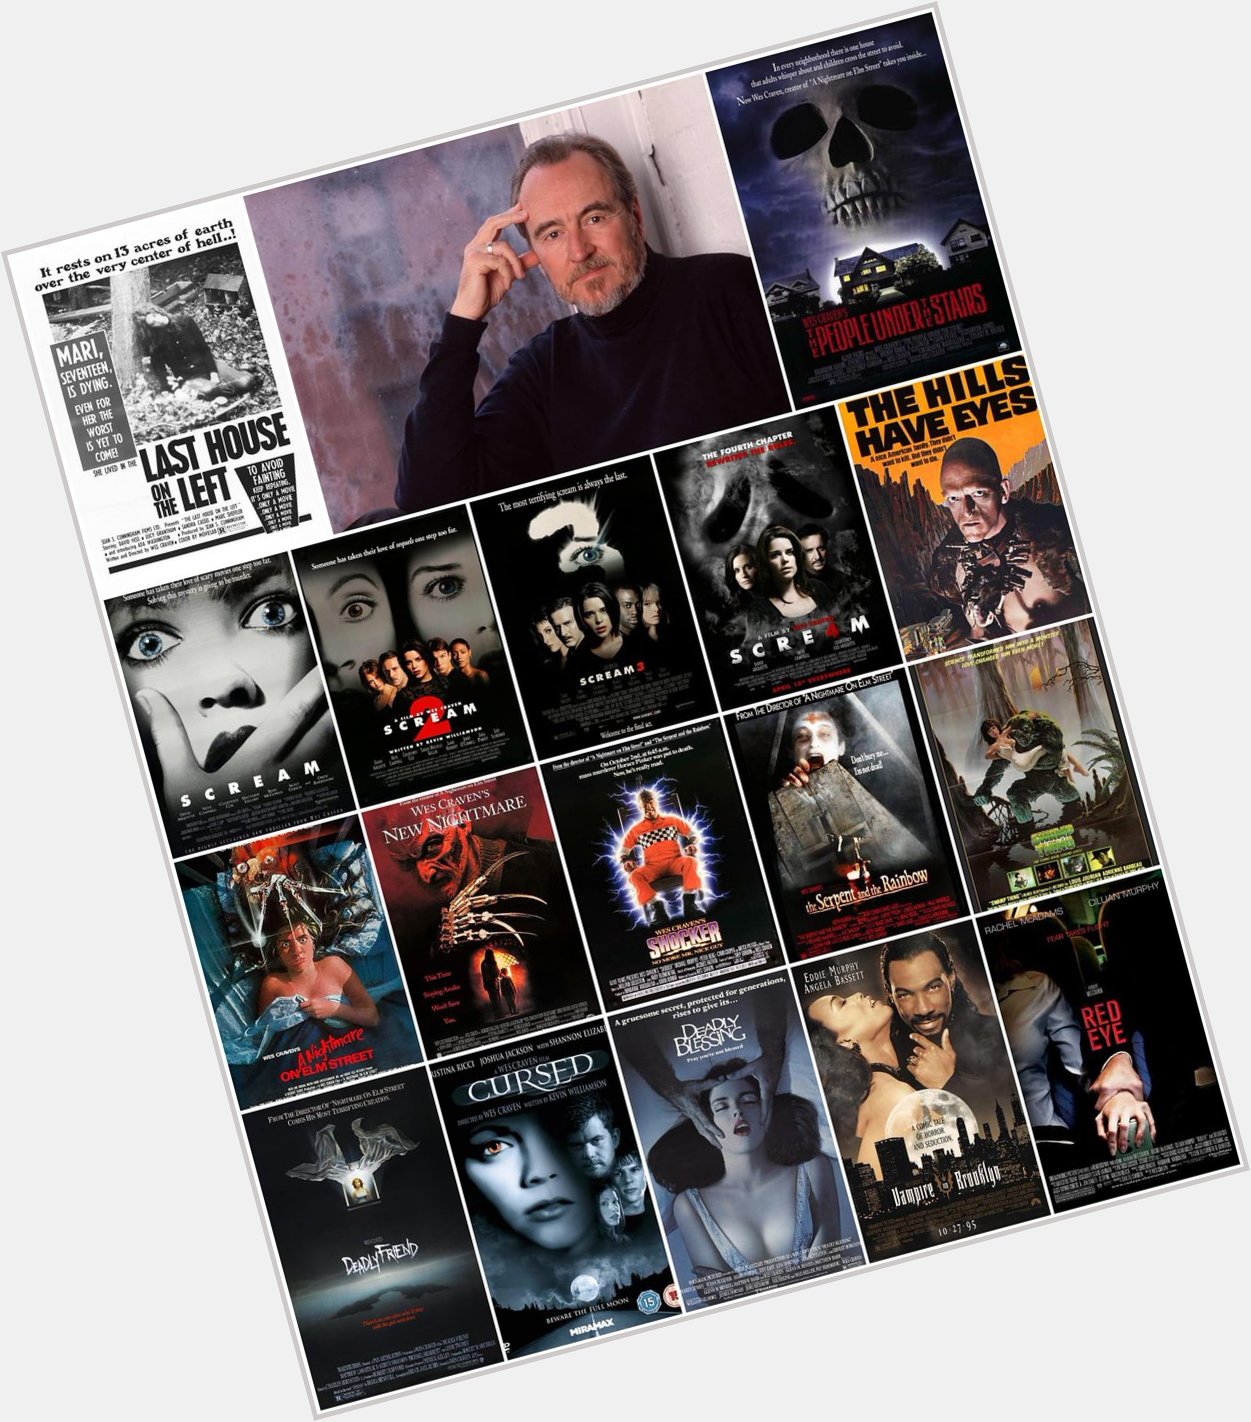 Happy Birthday Wes Craven! What is your favorite Wes Craven film? 